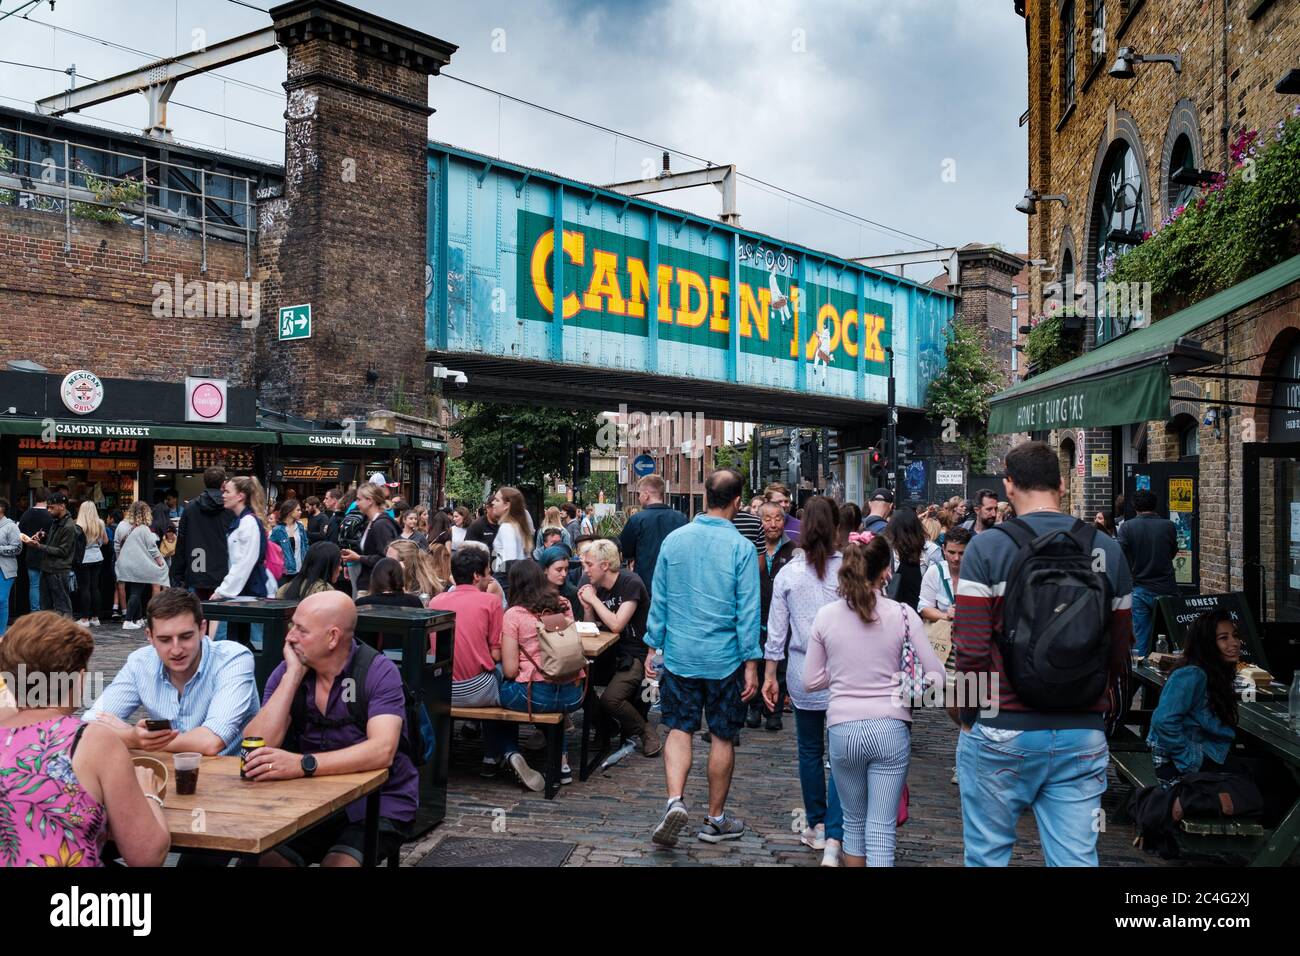 Outdoor seating restaurants at the Camden Town street market in London Stock Photo